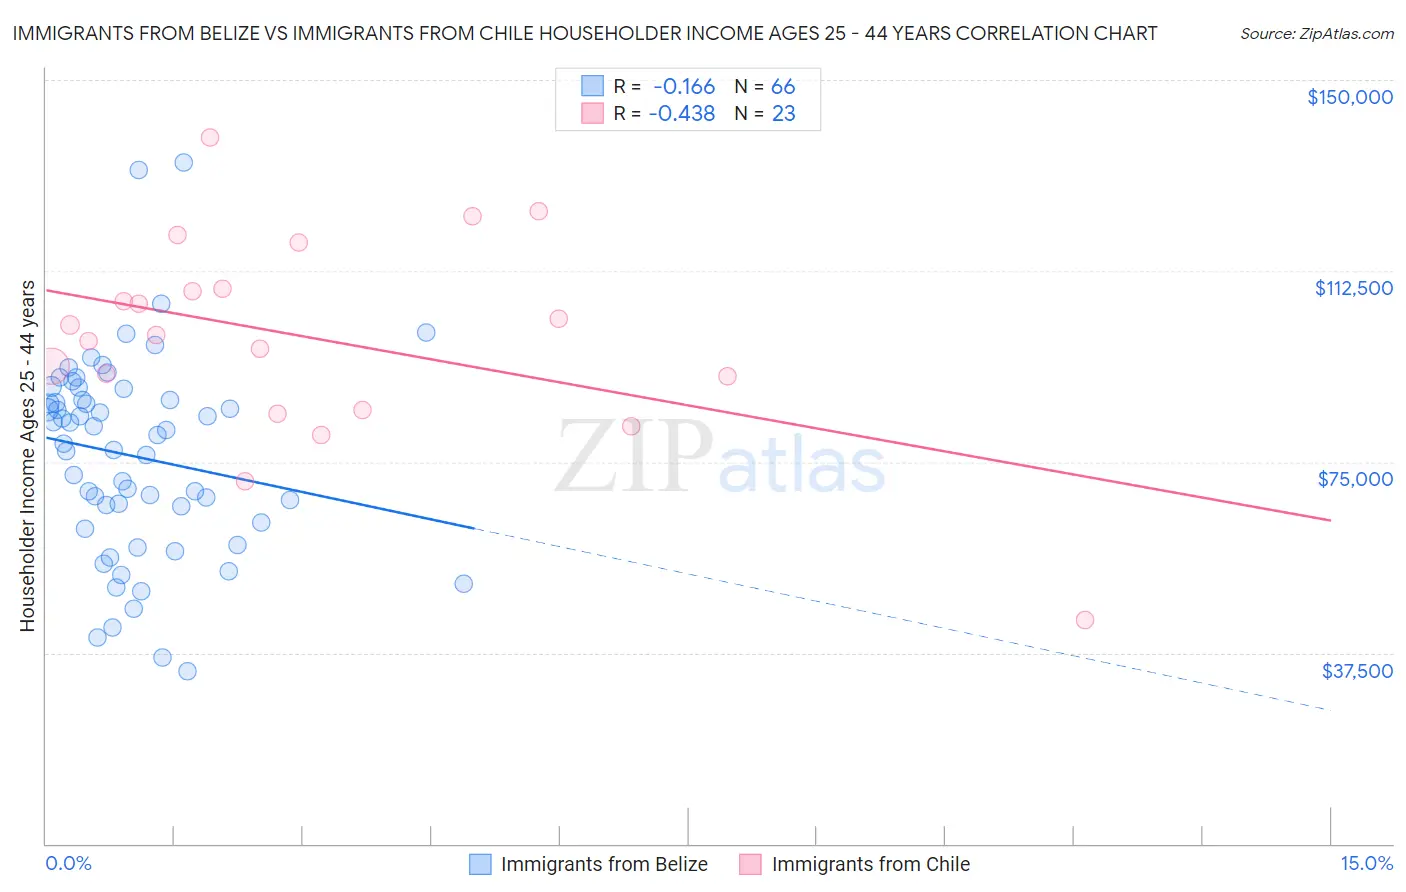 Immigrants from Belize vs Immigrants from Chile Householder Income Ages 25 - 44 years